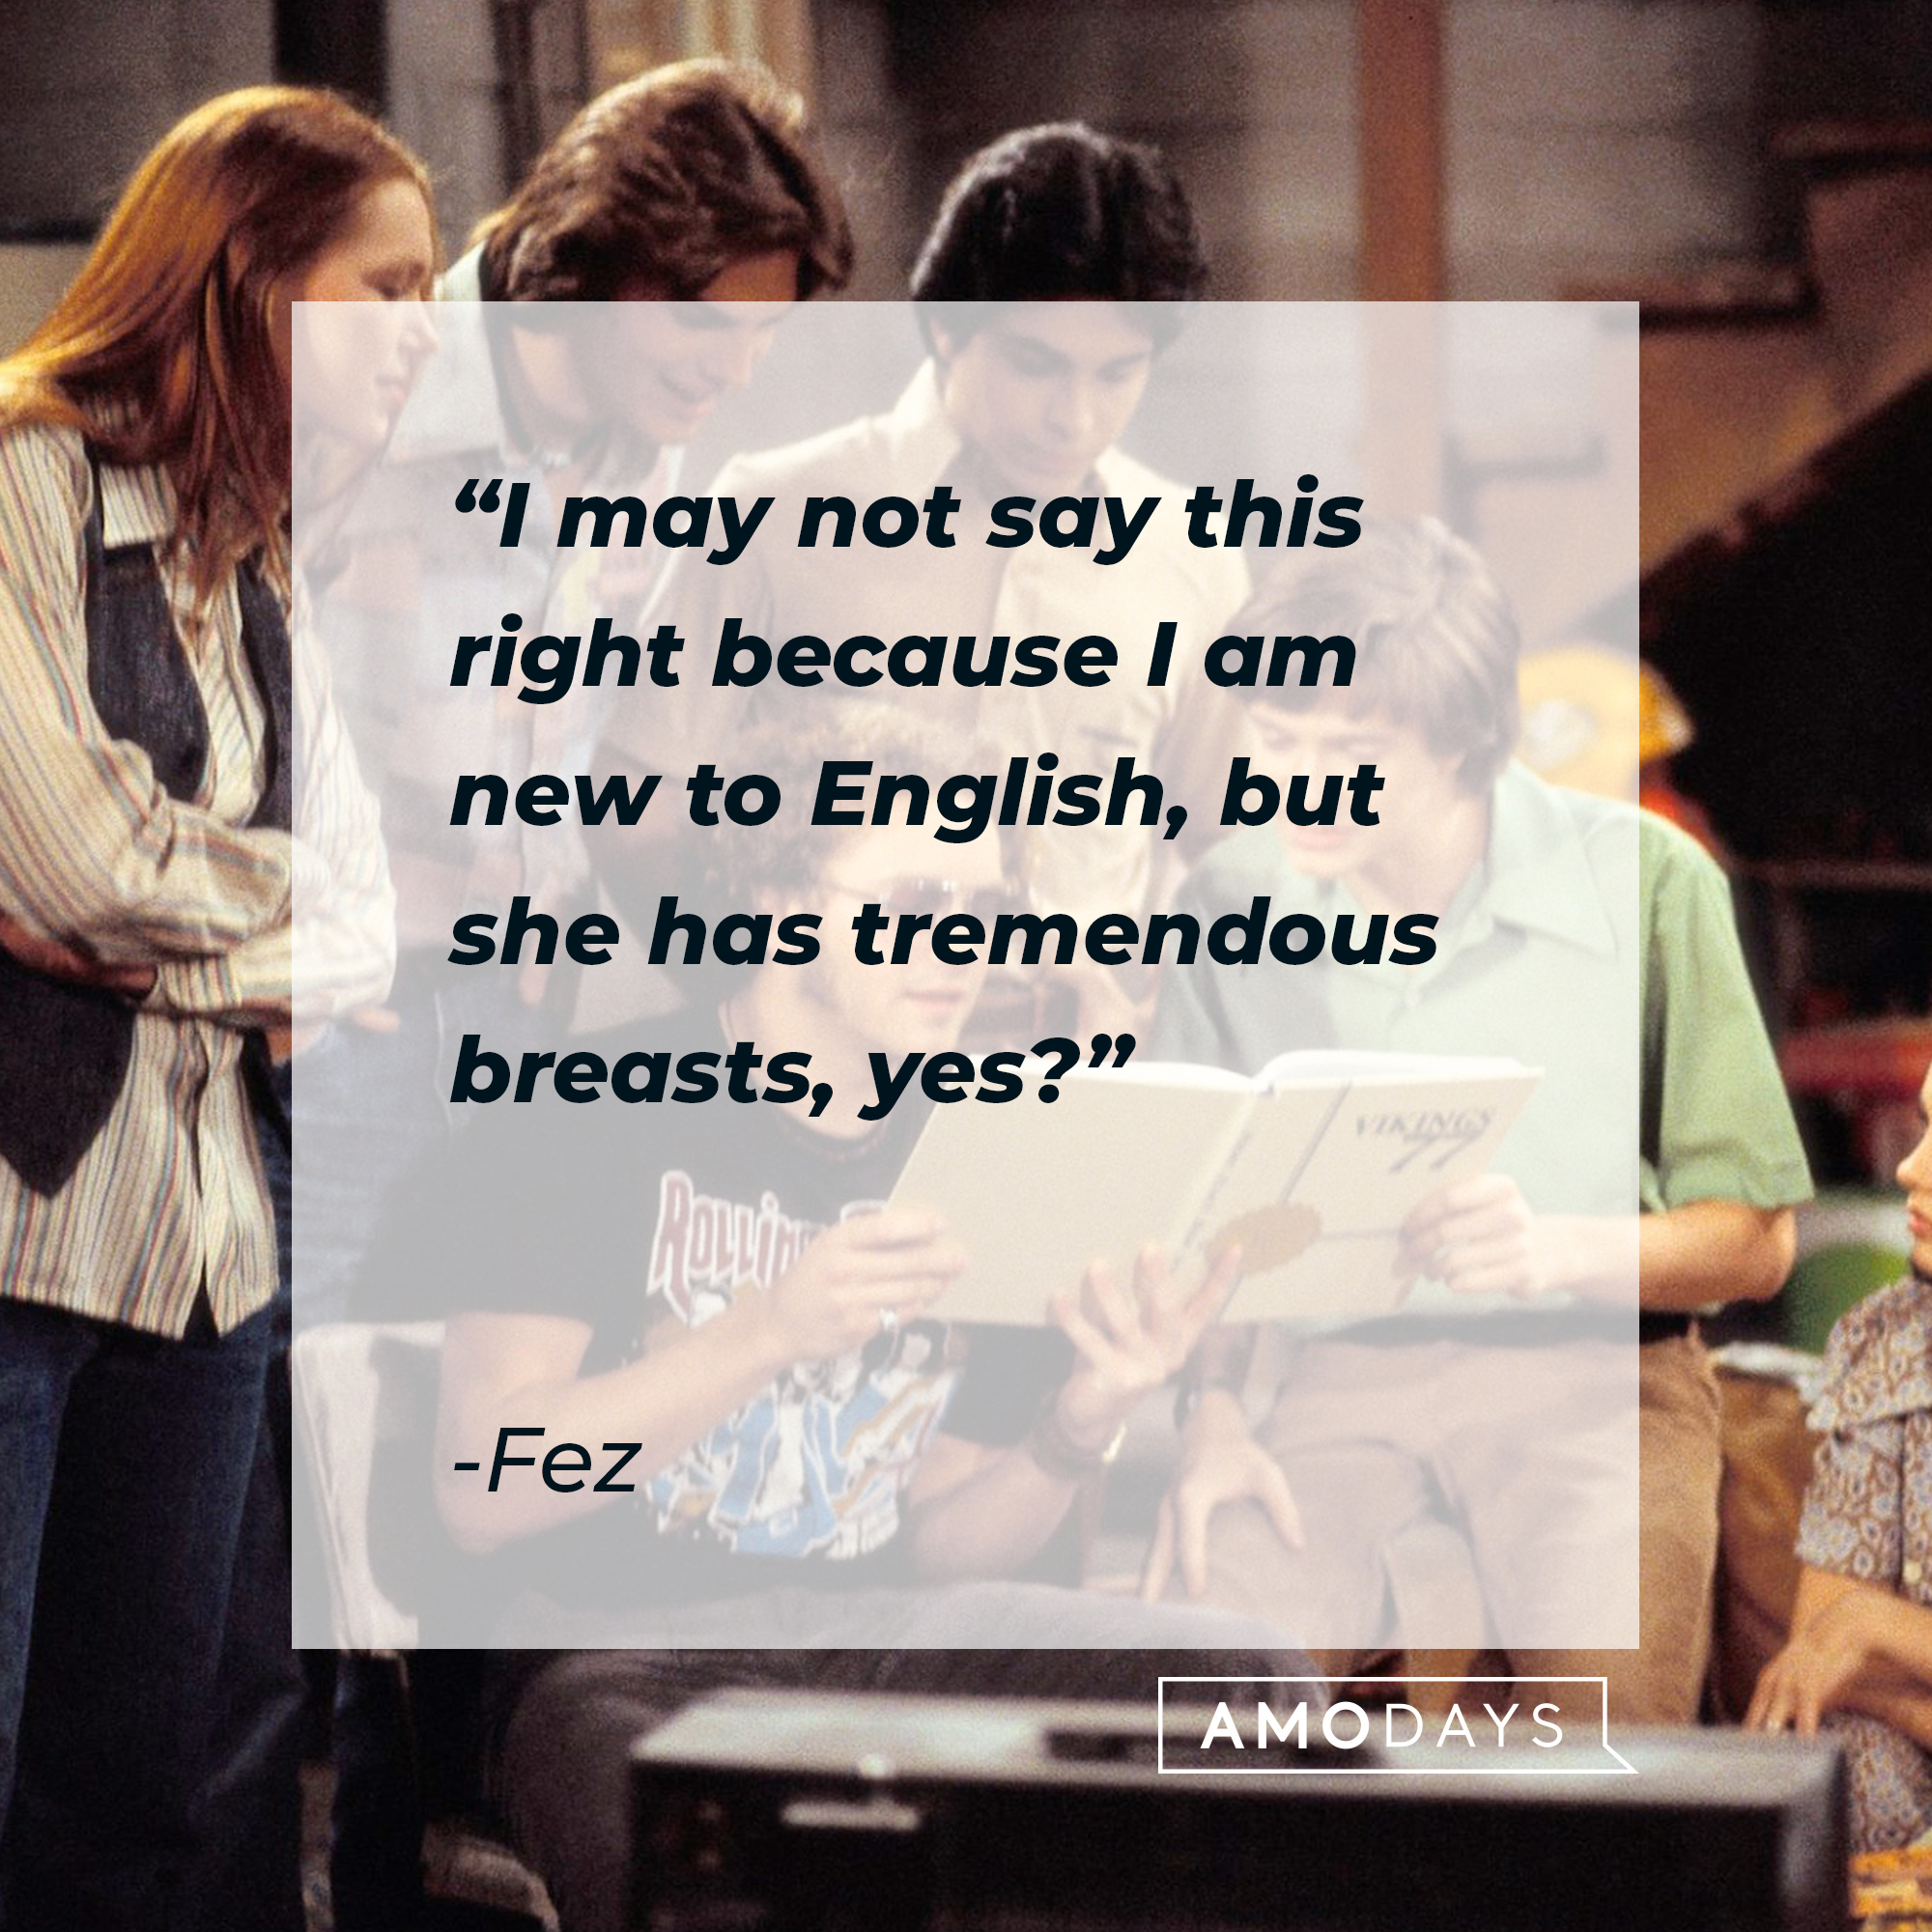 Fez's quote: “I may not say this right because I am new to English, but she has tremendous breasts, yes?” | Source: facebook.com/That-70s-Show-Official